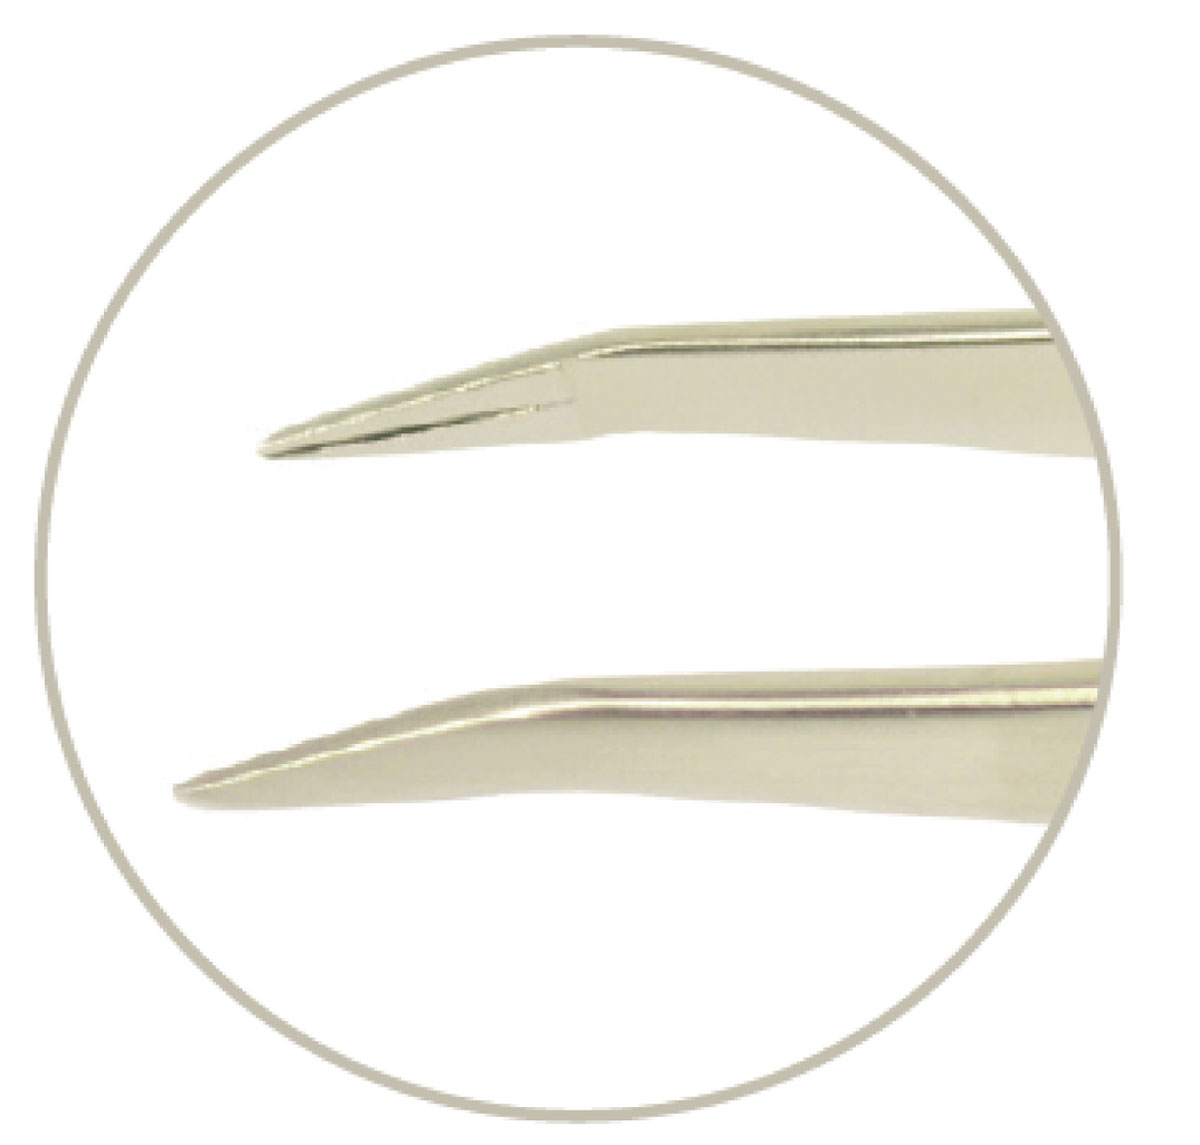 The grooves in these extended-duration punctal plug forceps allow for easy capture and insertion.